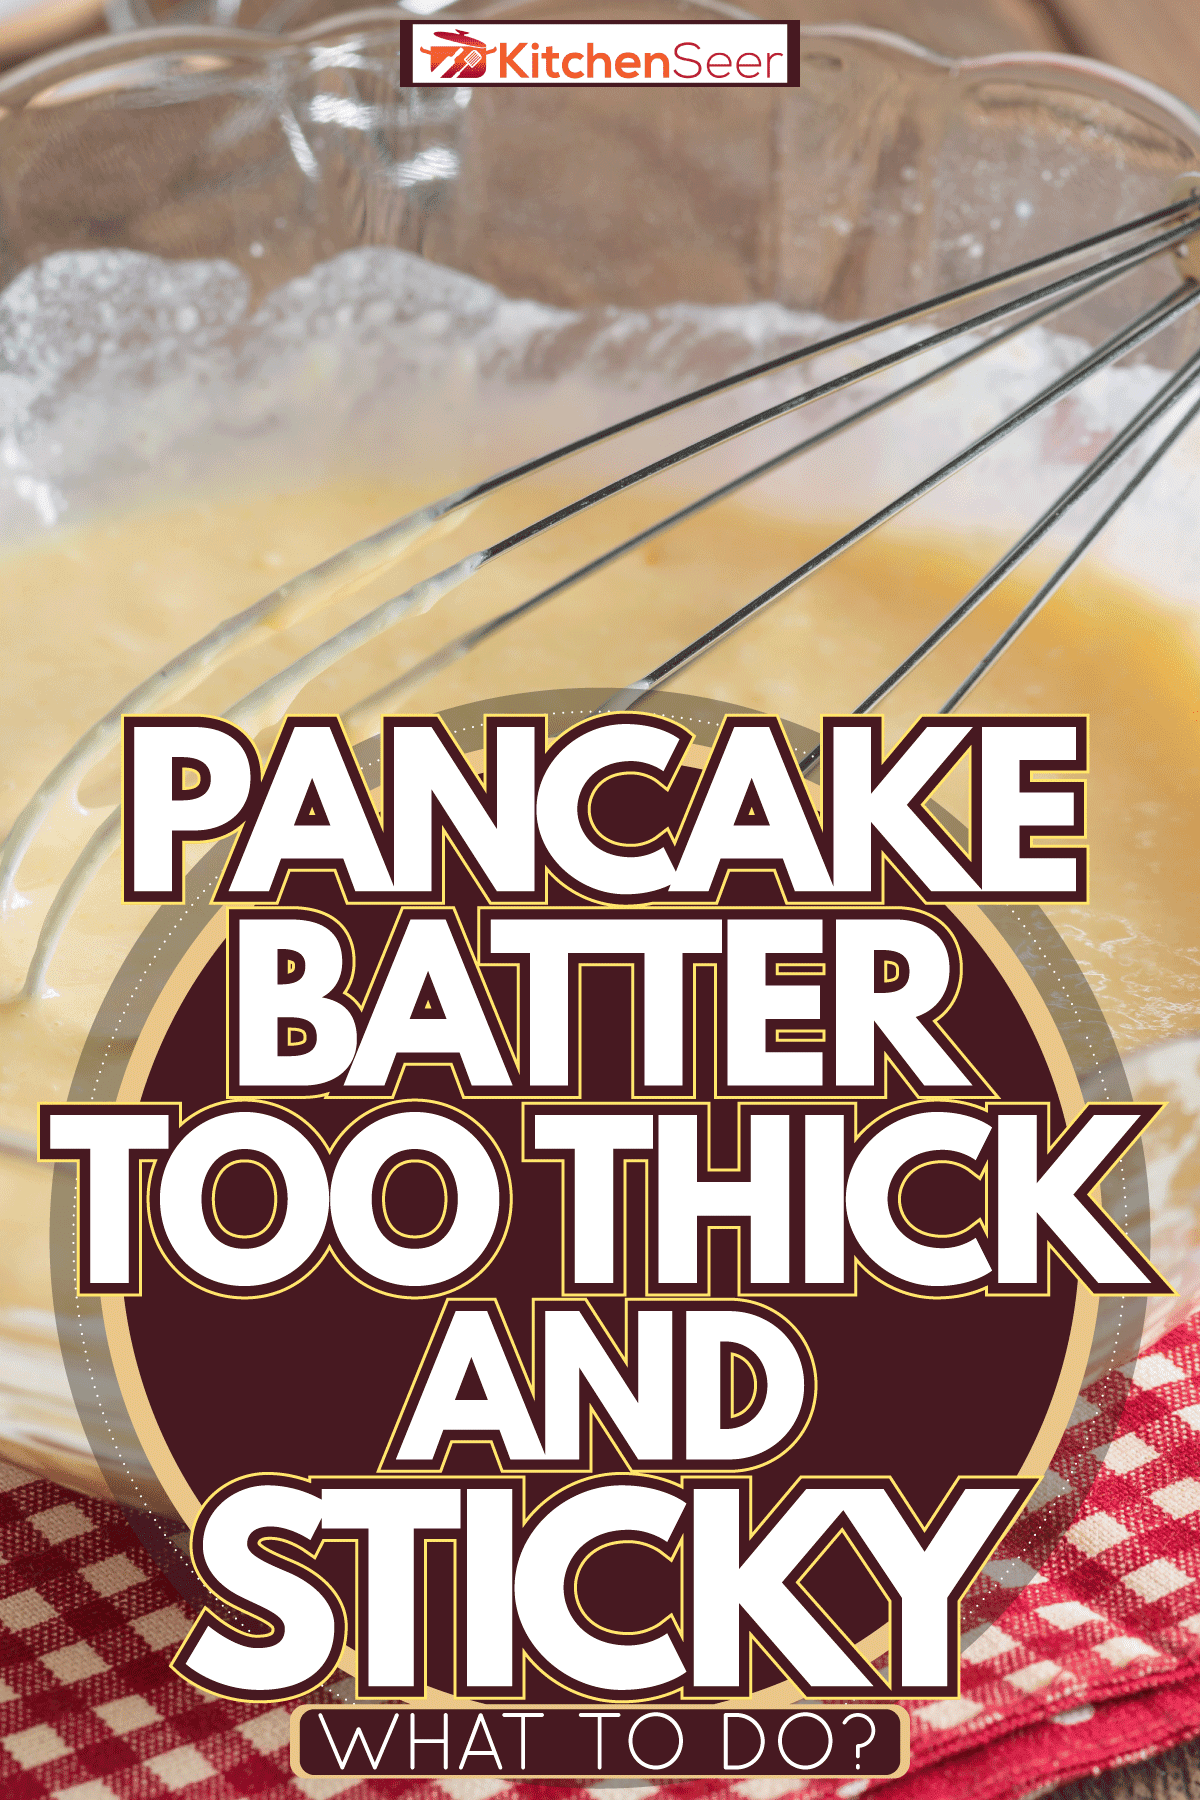 Mixed and battered pancake and butter, Pancake batter too thick and sticky - What to do?